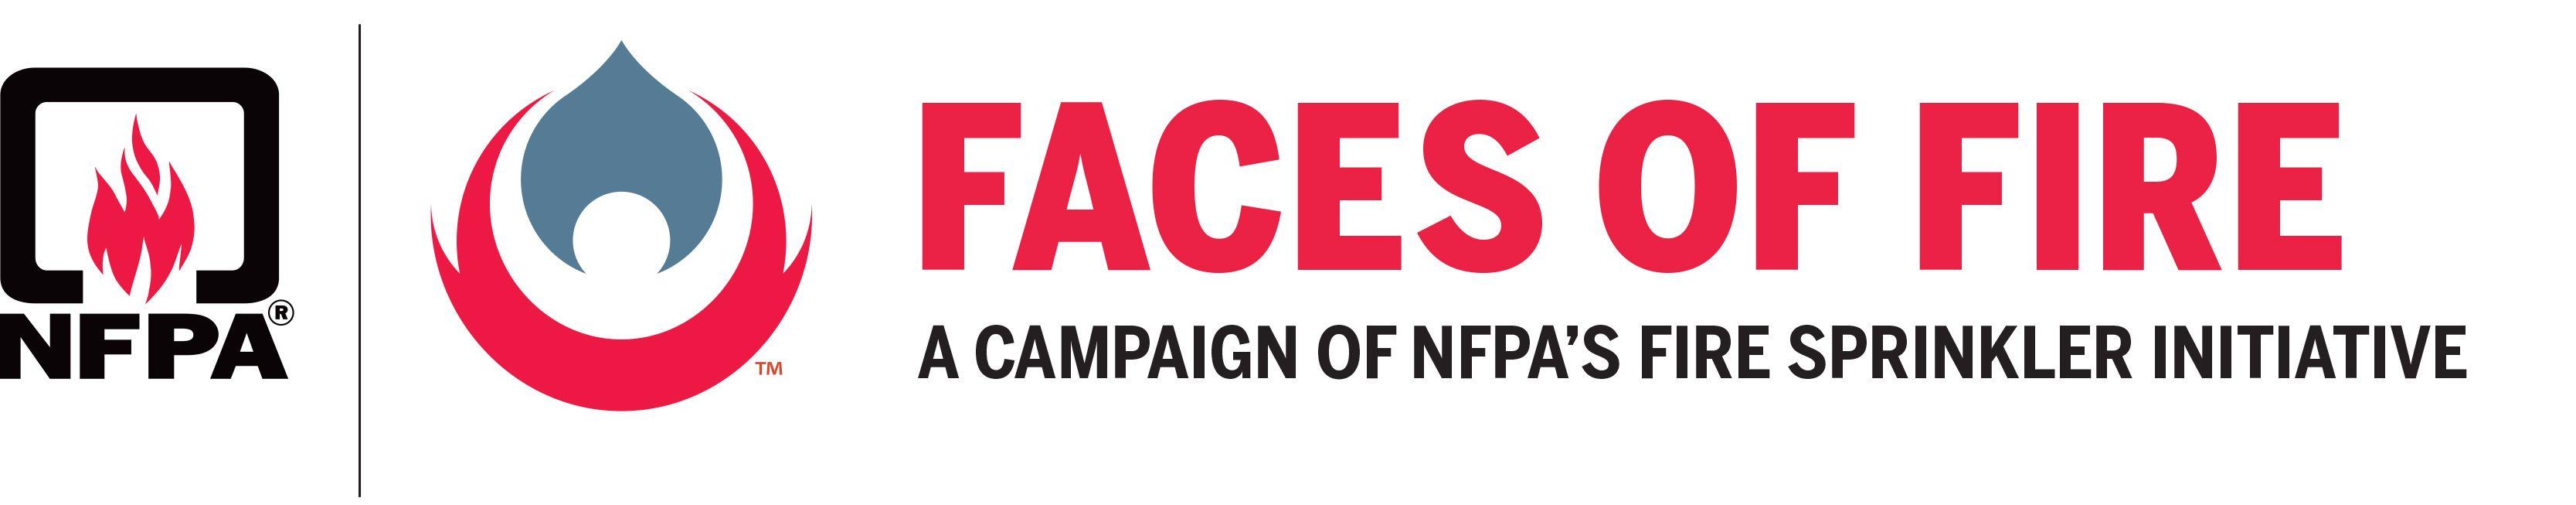 NFPA Logo - NFPA's Fire Sprinkler Initiative-Faces of Fire Campaign